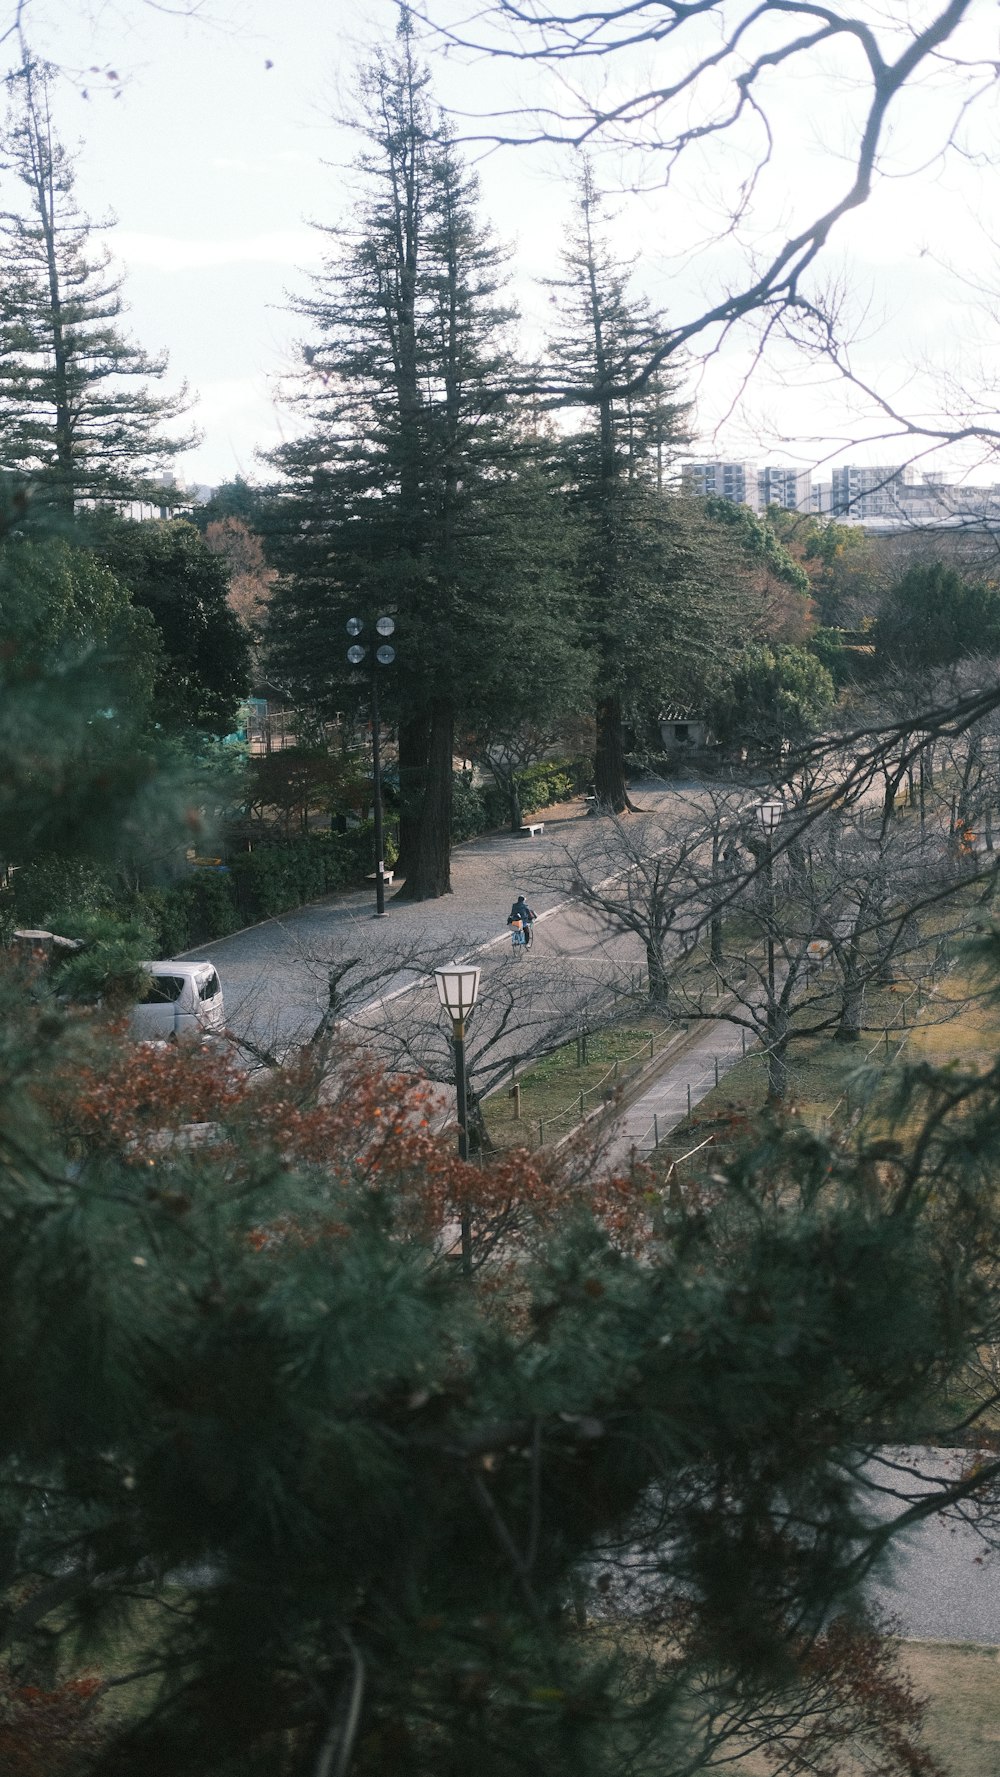 a view of a street with trees and a person on a bike